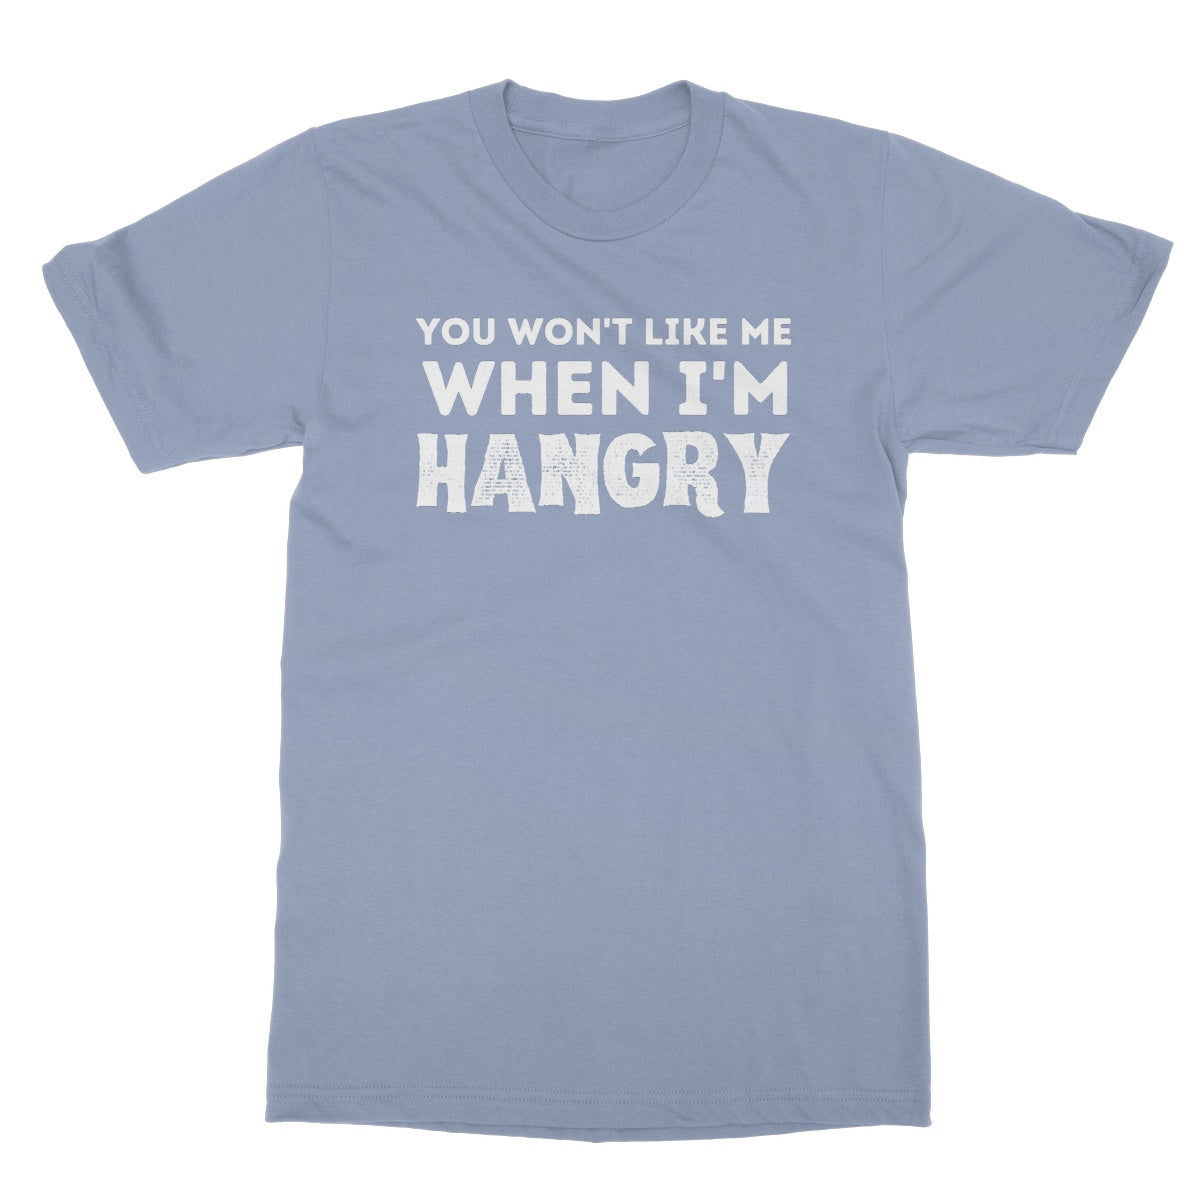 you won't like me when I'm hangry t shirt blue